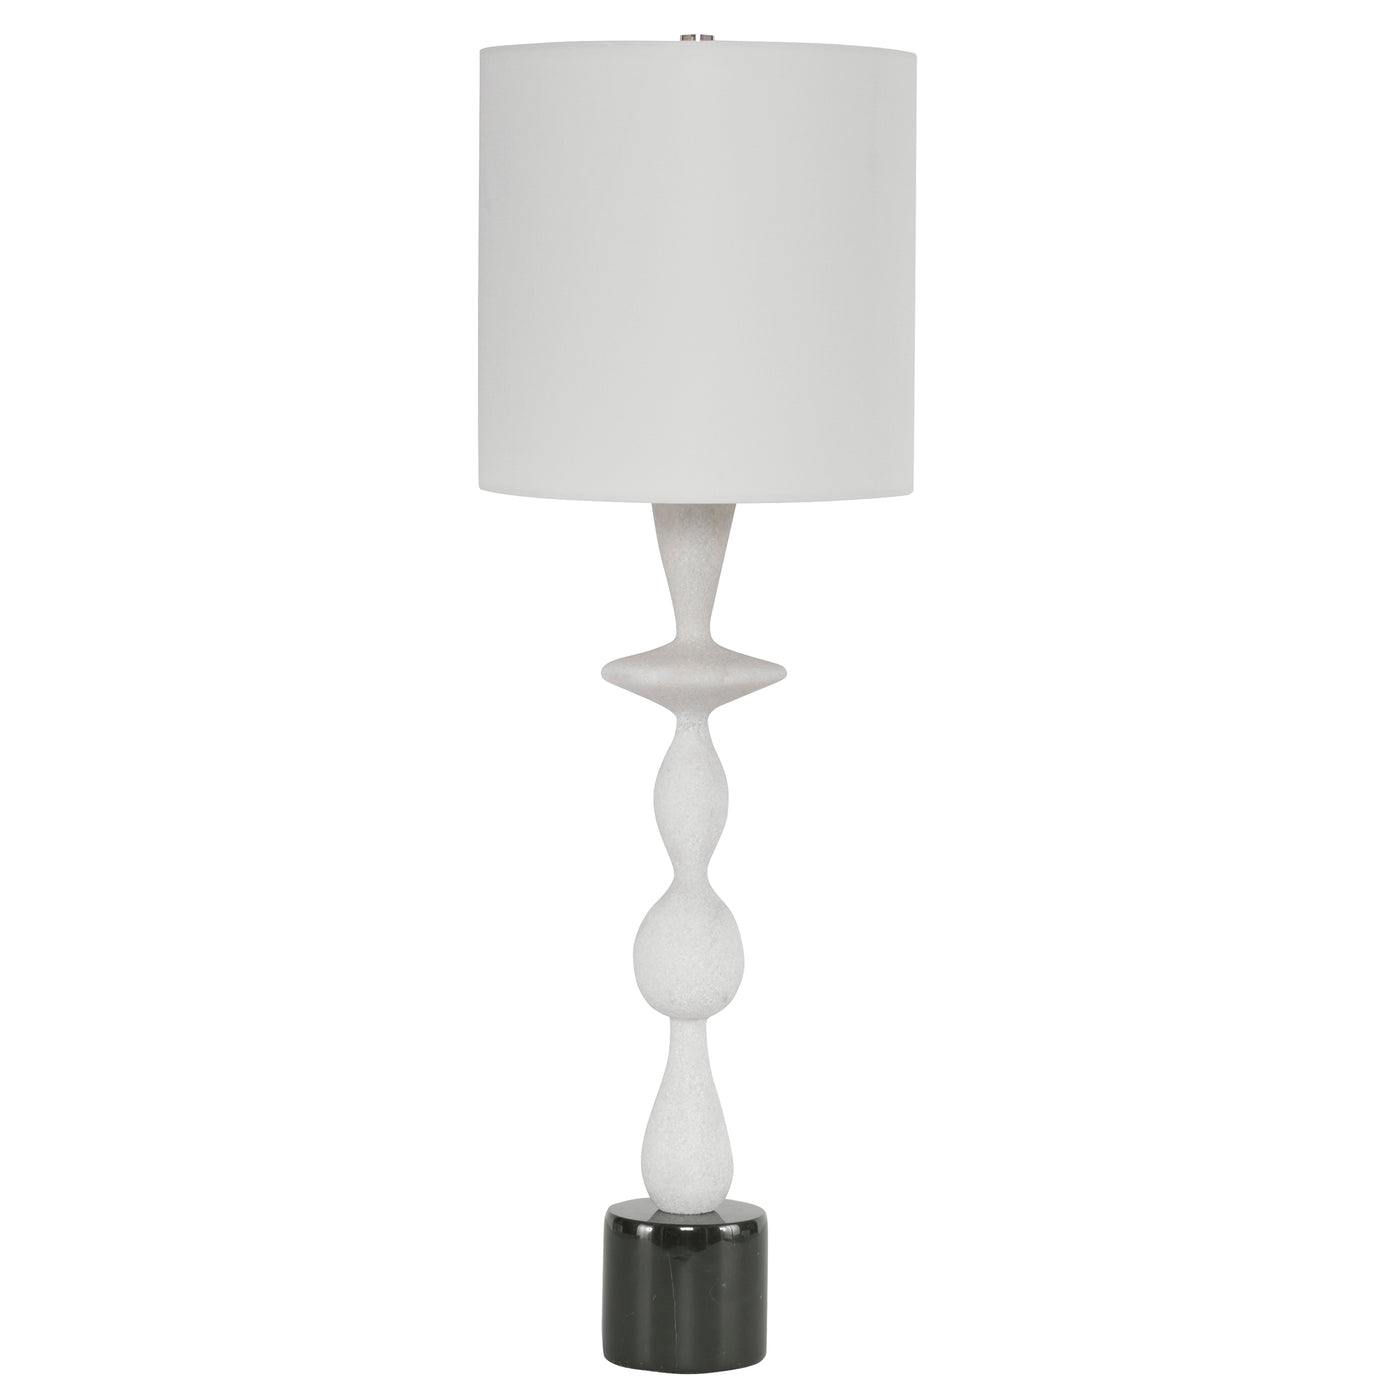 A Modern Black And White Table Lamp Executed In A Rich Material Made Of Granulated Marble That Accurately Replicates The L...